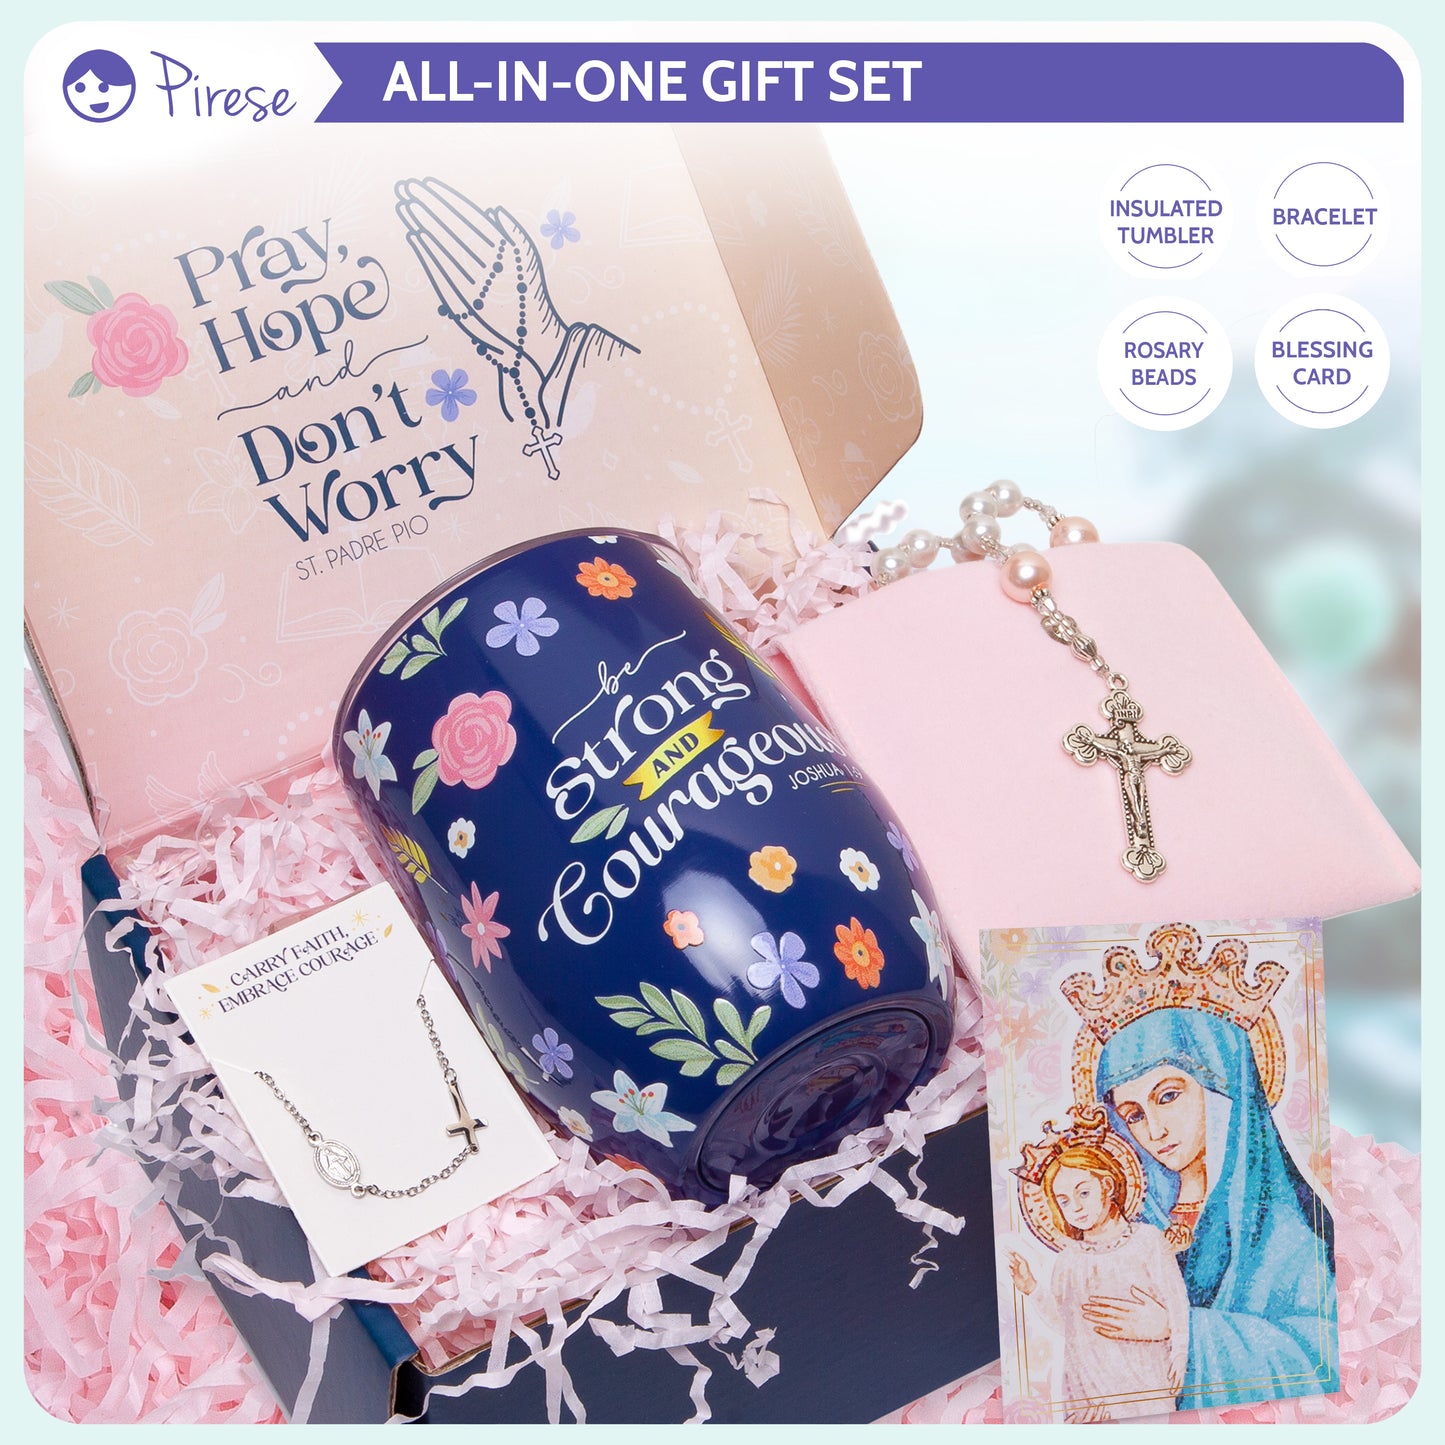 Catholic Gifts Women, Confirmation Gifts for Girls, First Communion Gifts